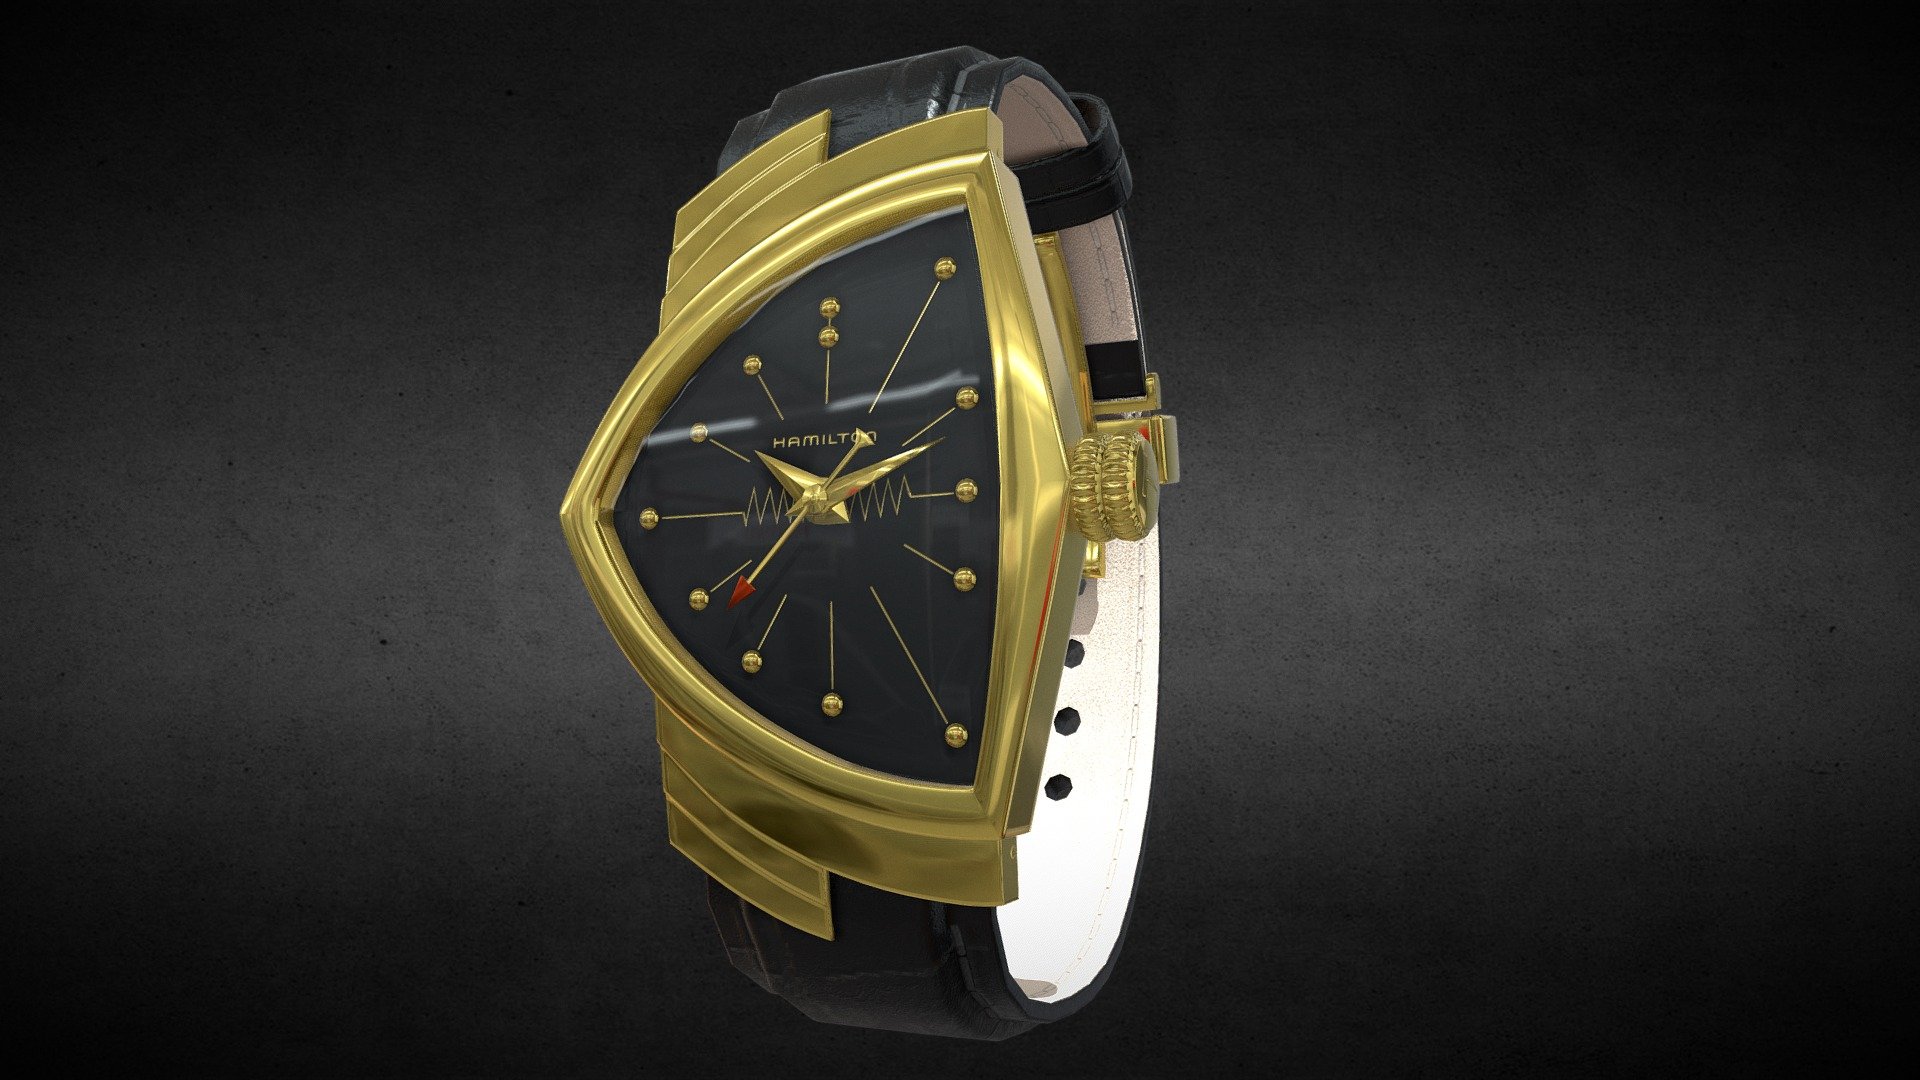 Awesome stainless steel Hamilton Ventura Quartz Watch
Use for Unreal Engine 4 and Unity3D. Try in augmented reality in the AR-Watches app. 
Links to the app: Android, iOS

Currently available for download in FBX format.

3D model developed by AR-Watches

Disclaimer: We do not own the design of the watch, we only made the 3D model 3d model